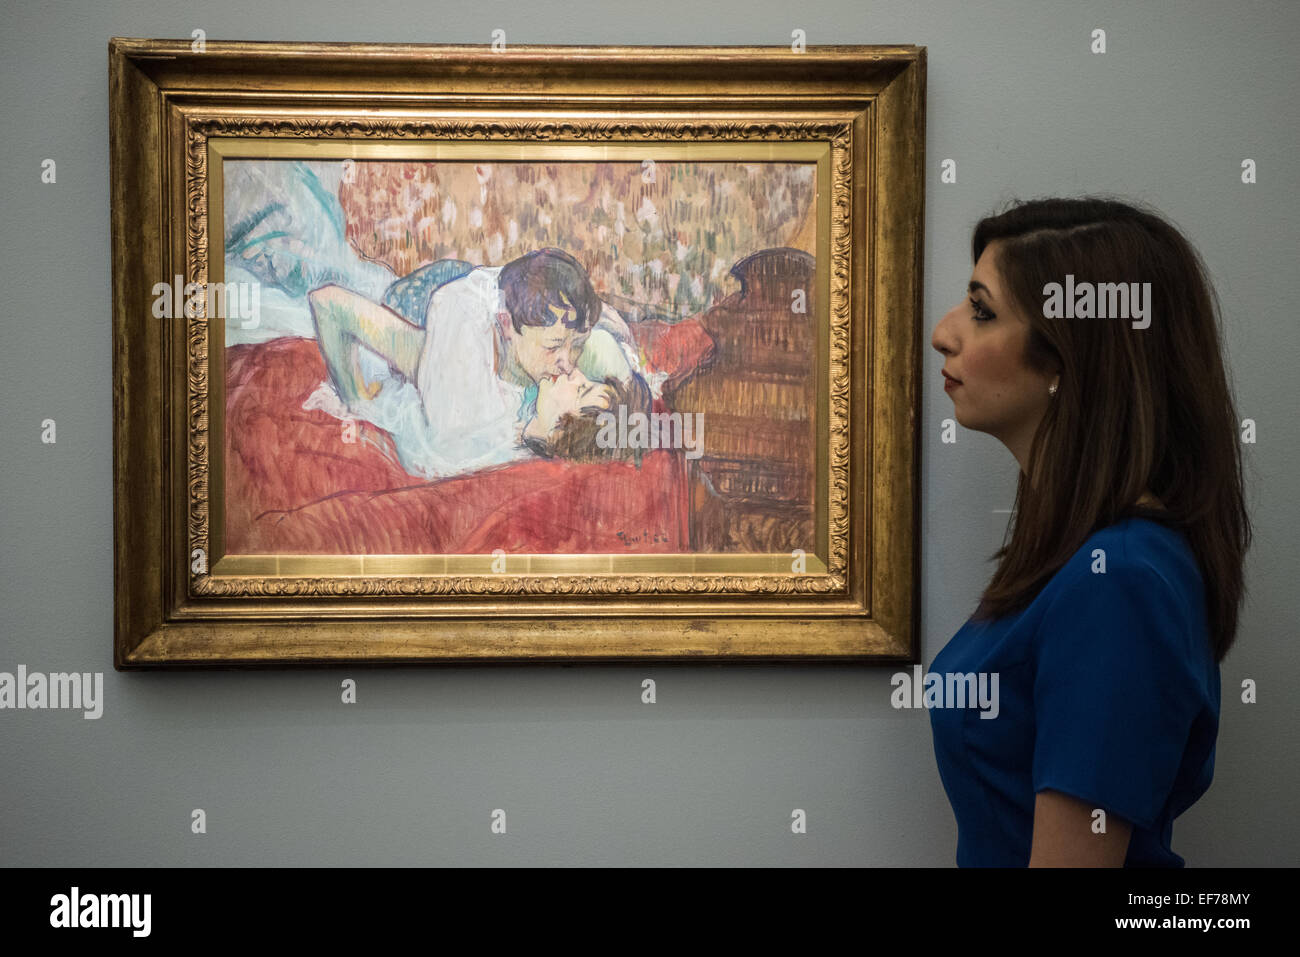 London, UK. 28th January, 2015. : a Sotheby's employee looks at Au lit: le  baiser (£9-12 million) by Henri de Toulouse-Lautrec during the press view  of the Impressionist & Modern, Surrealist and